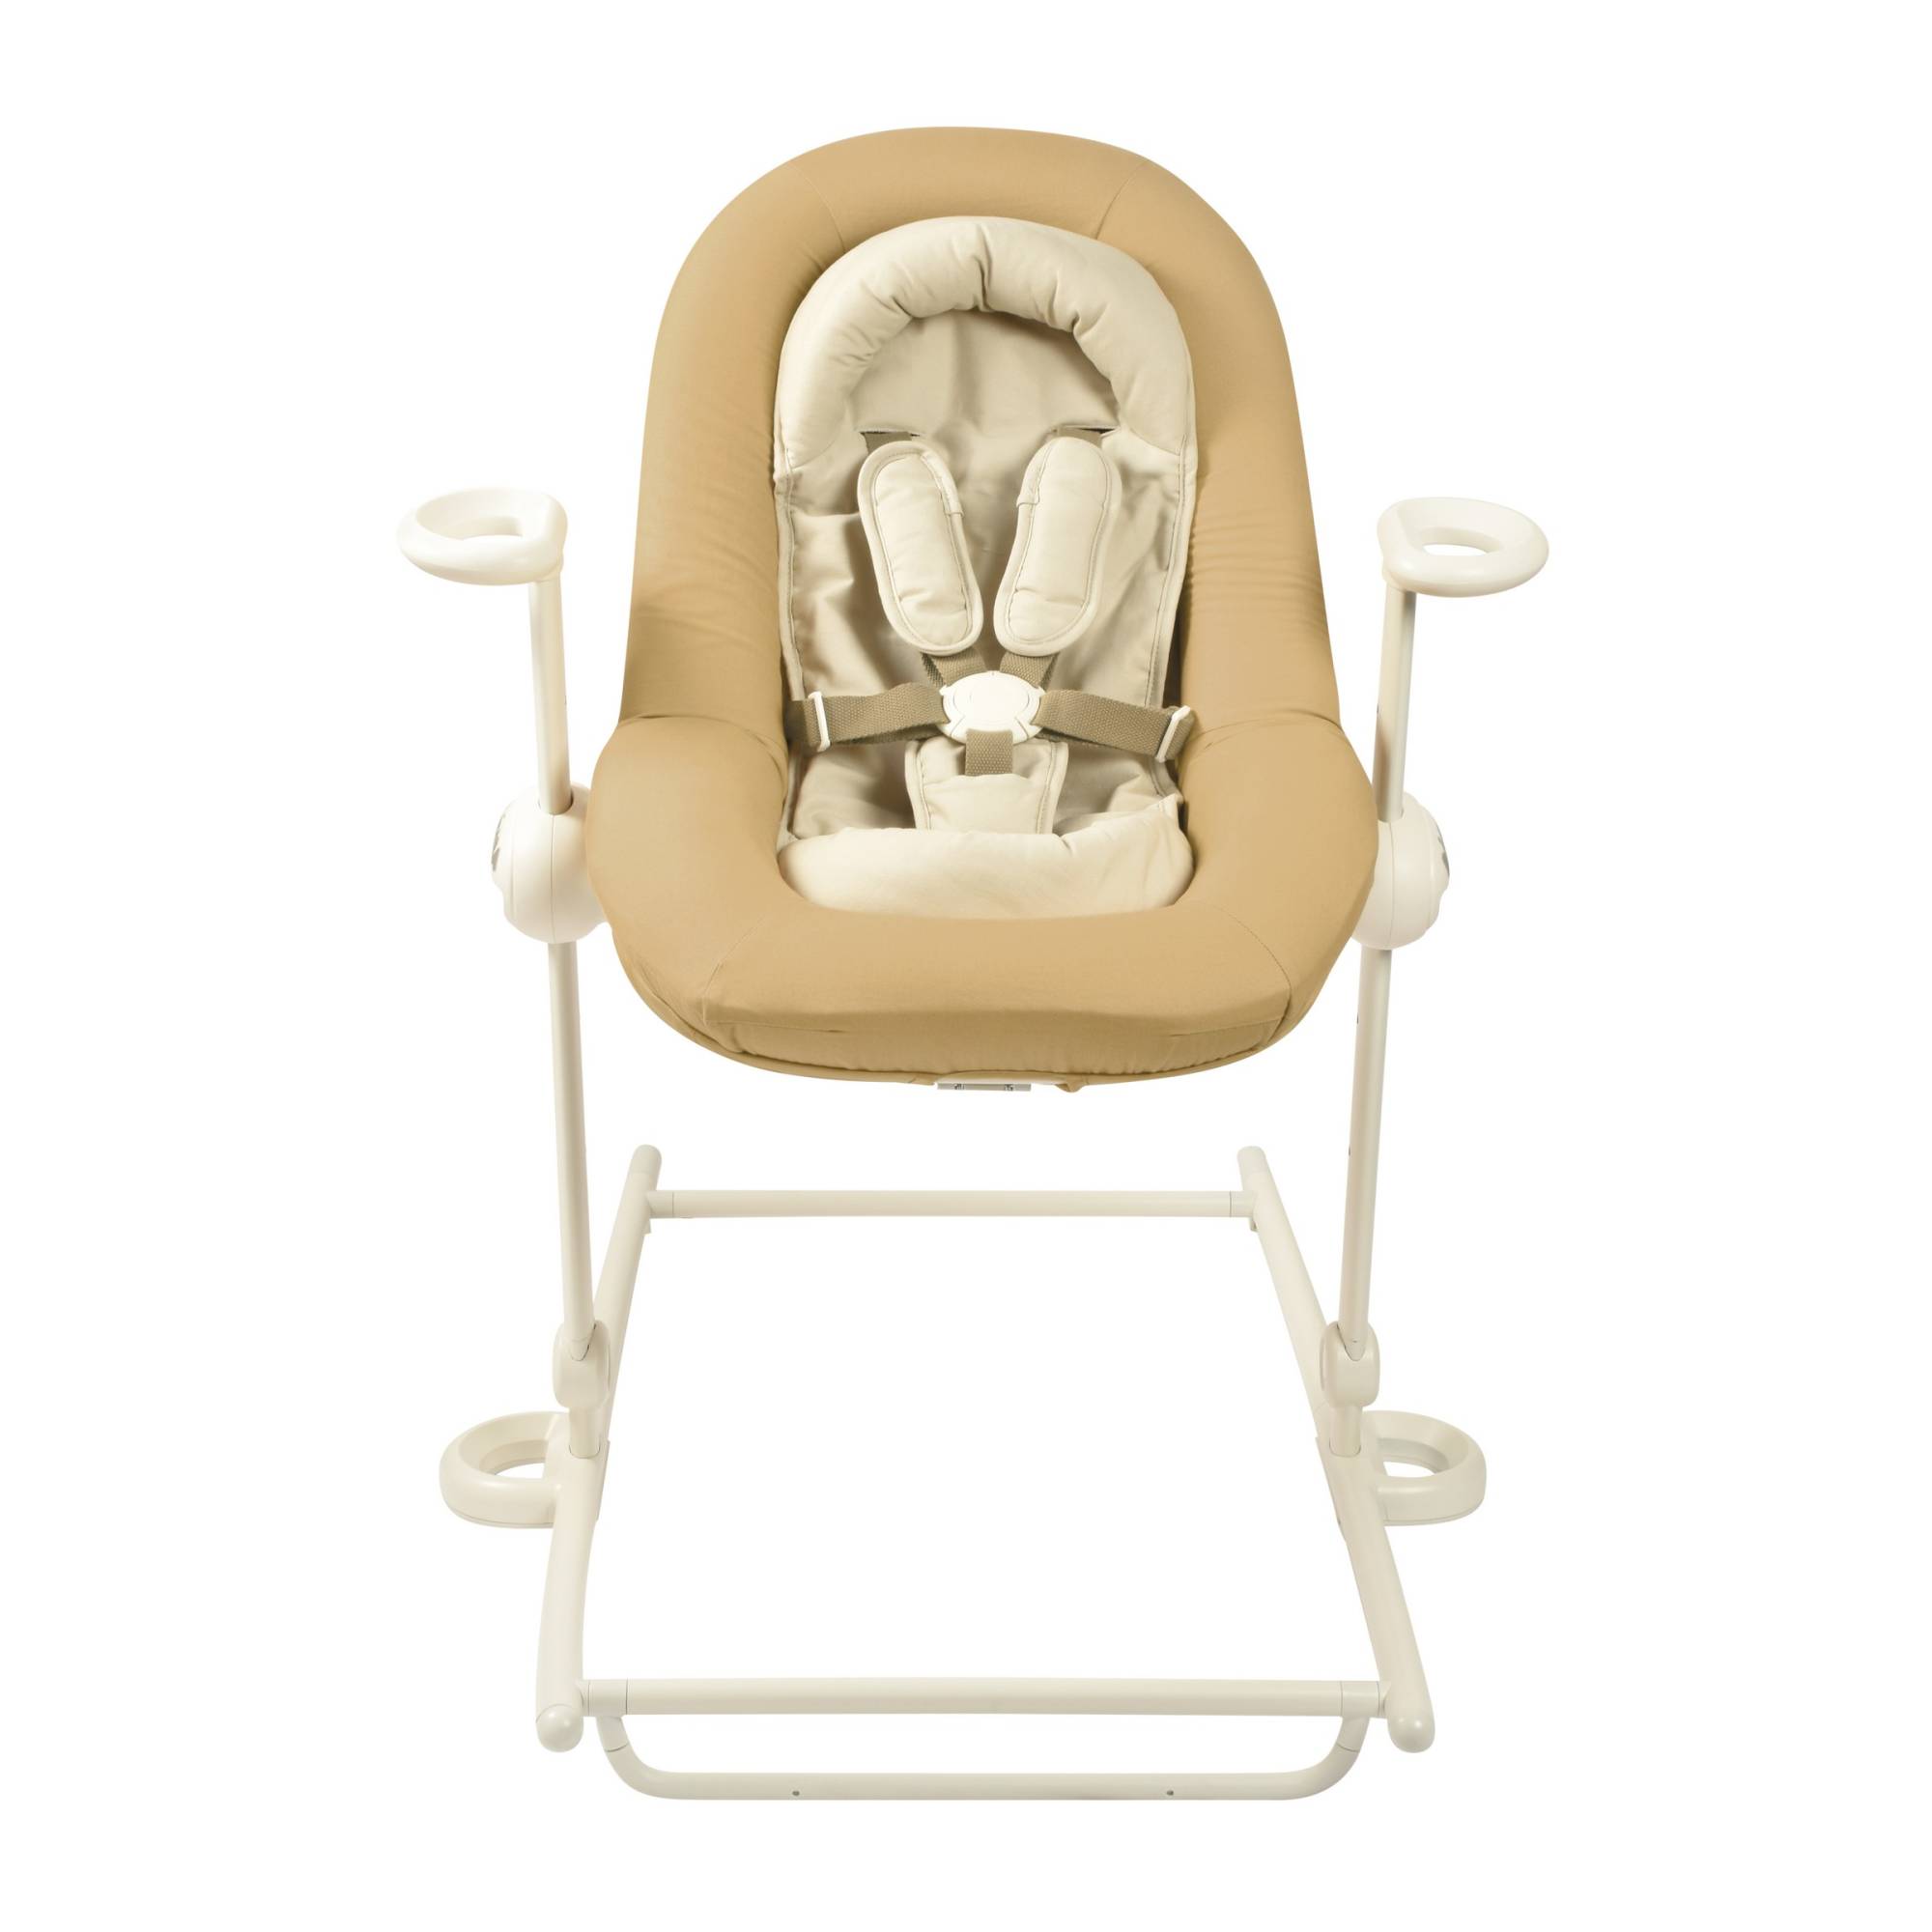 Beaba Baby Seat - Up & Down Portable Baby Rocker for Sale in